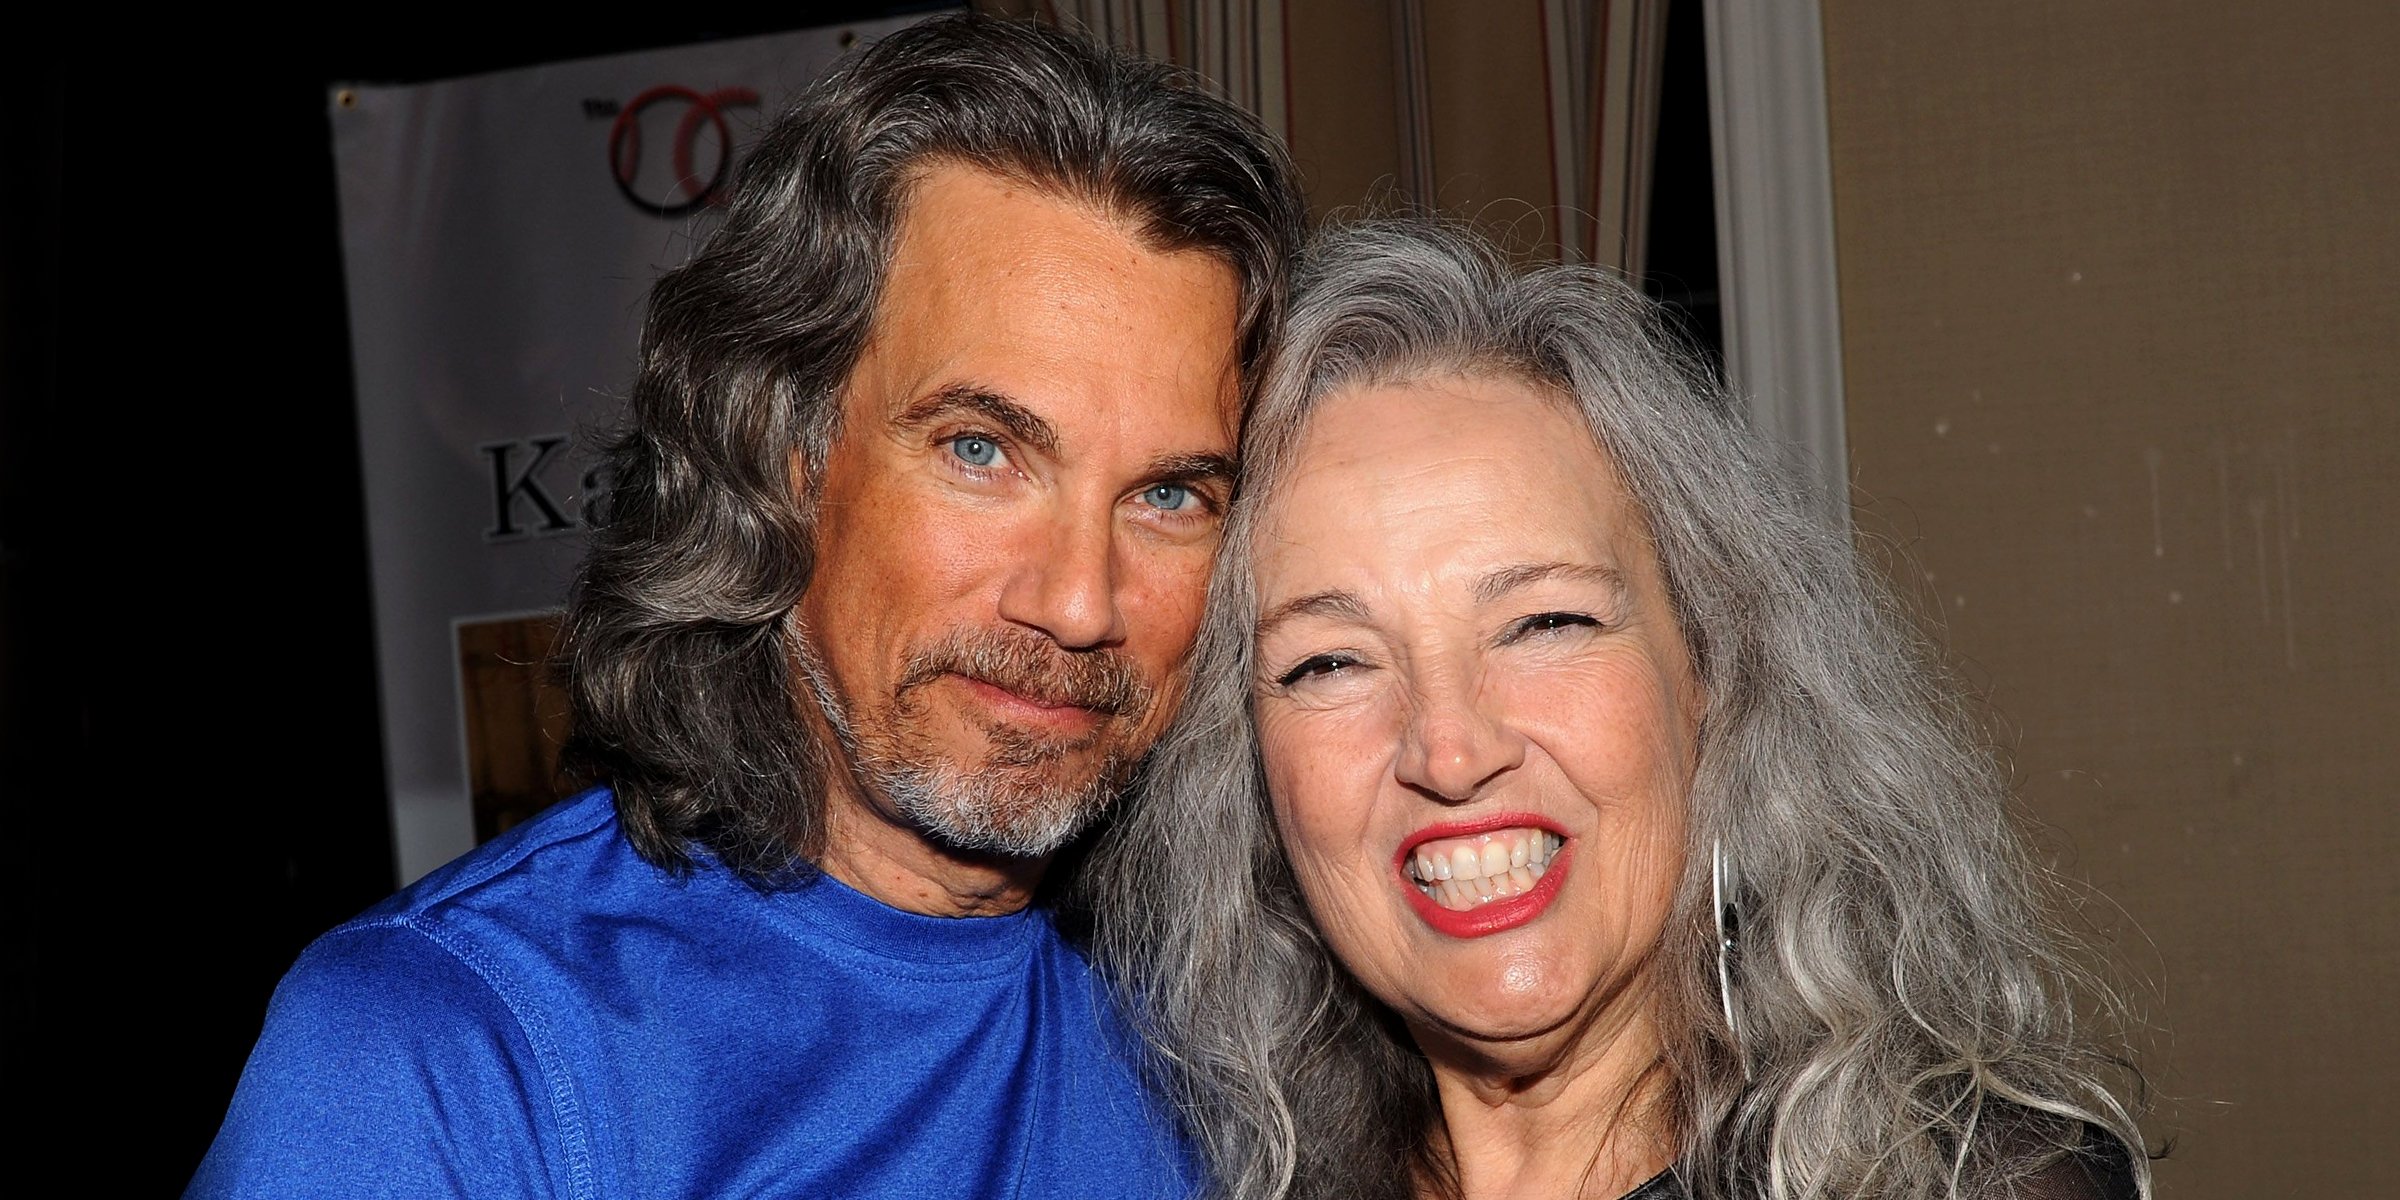 Robby Benson and Karla DeVito, 2015 | Source: Getty Images